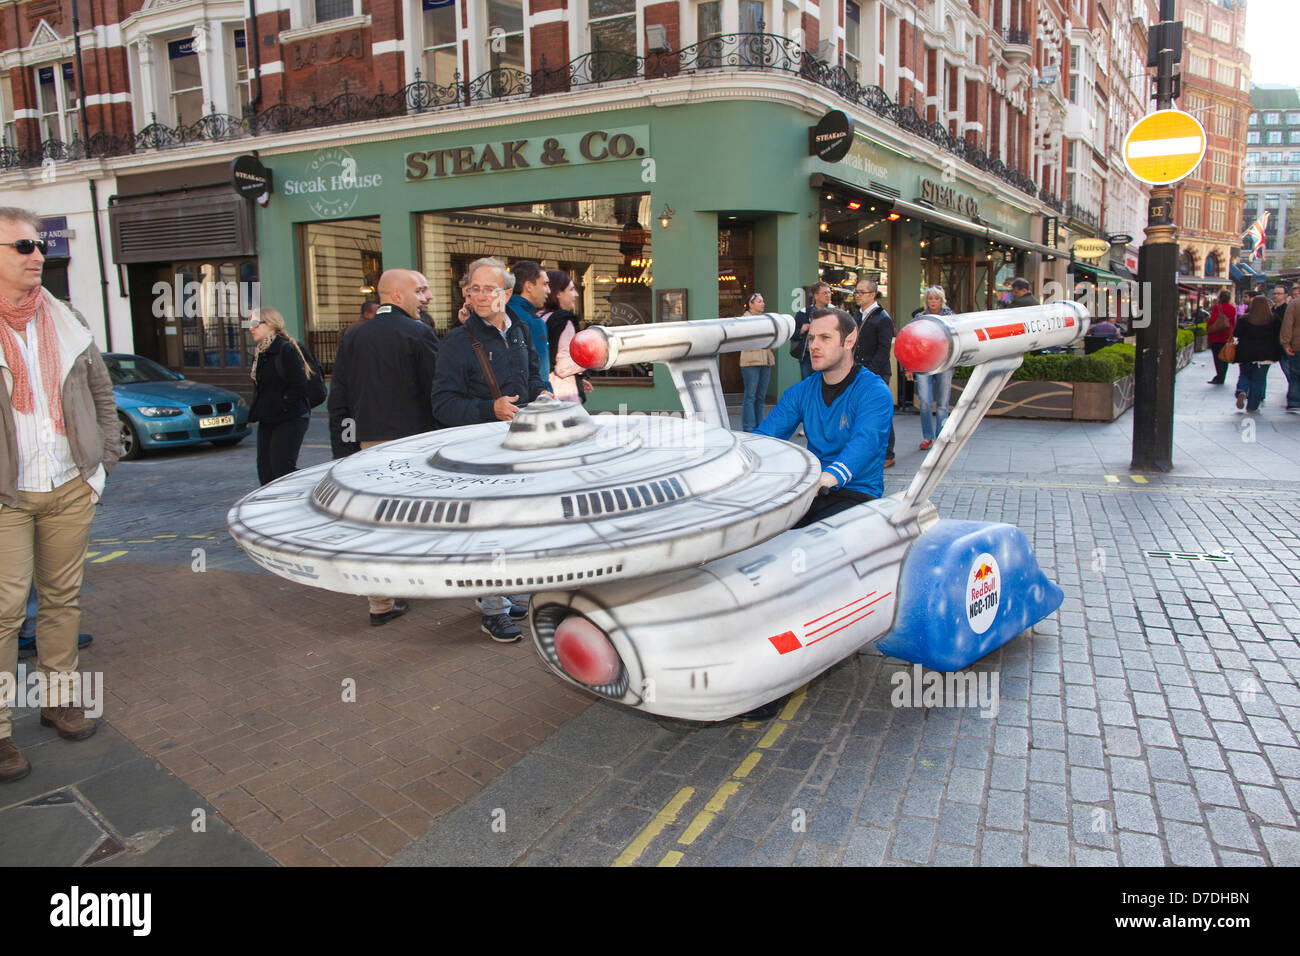 London, UK. 2nd May 2013.  Ultimate Trekkie fan Rob Wixey from Ealing, London, arrives at Star Trek Into The Darkness premiere with his homemade soapbox Starship which he will be racing at the Red Bull Soapbox race at Alexandra Palace on Sunday 14 July. © Westpix.co.uk / Alamy Live News Stock Photo